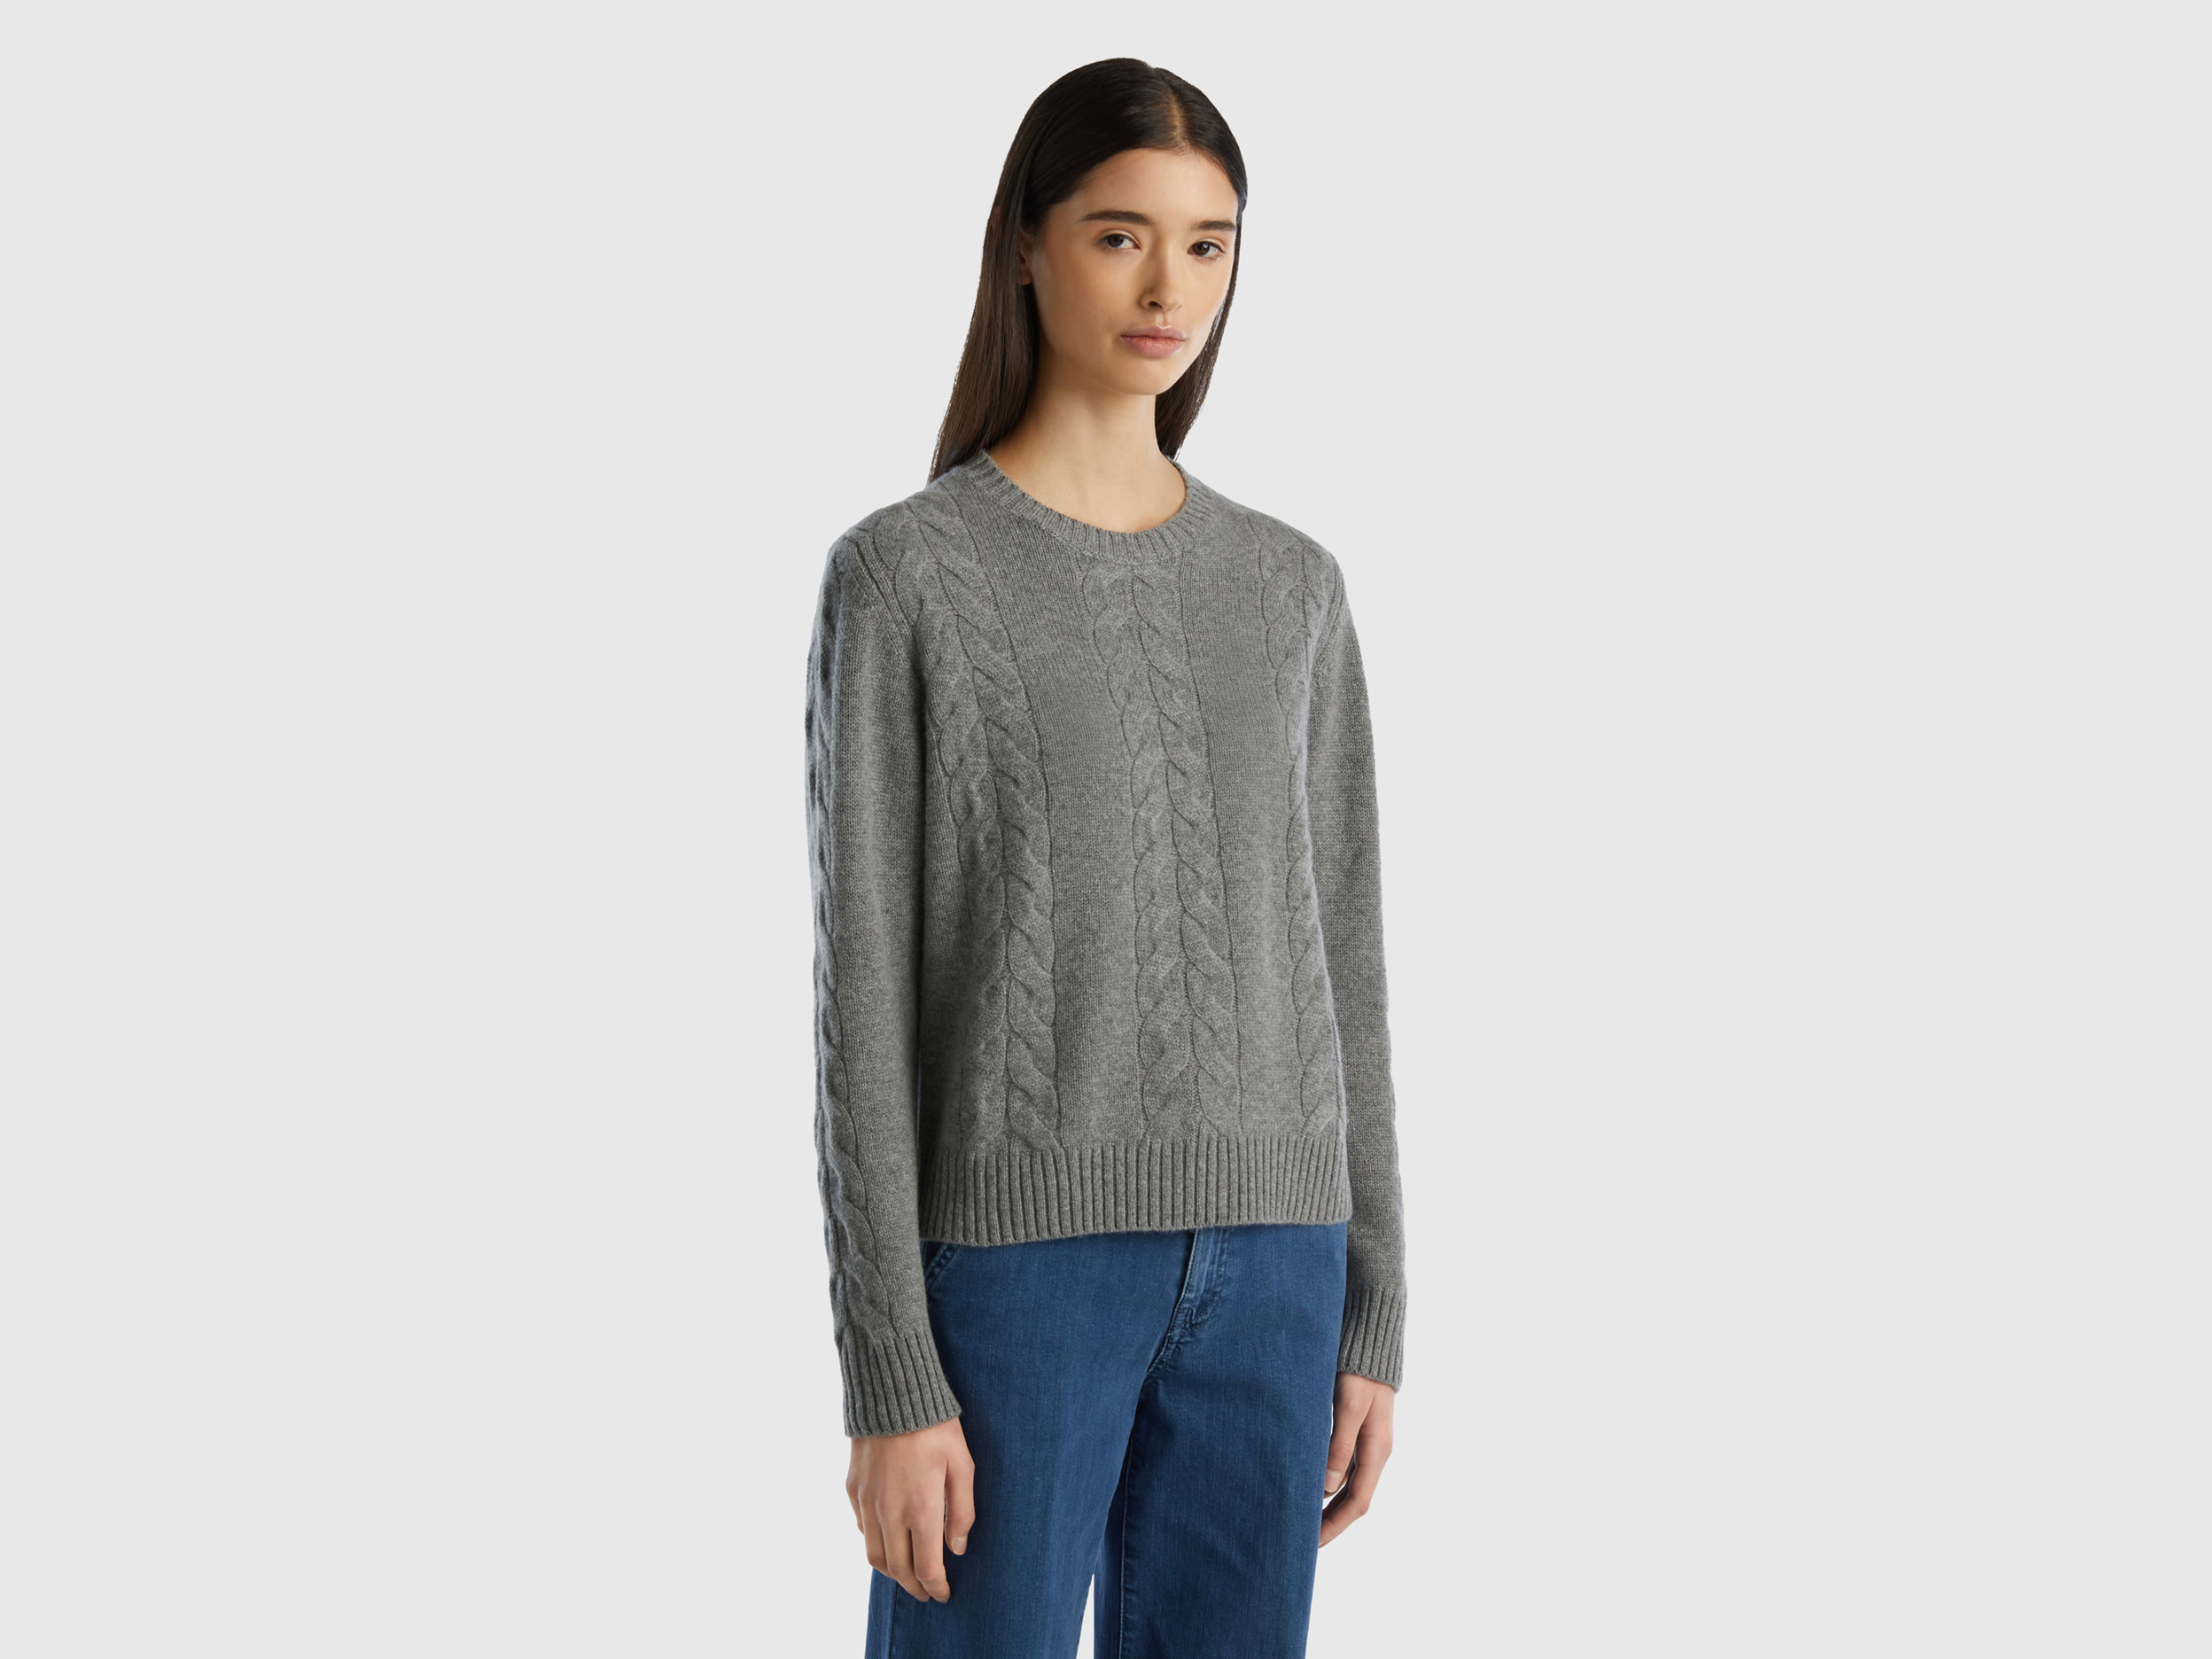 Benetton, Cable Knit Sweater In Pure Cashmere, size XS, Dark Gray, Women